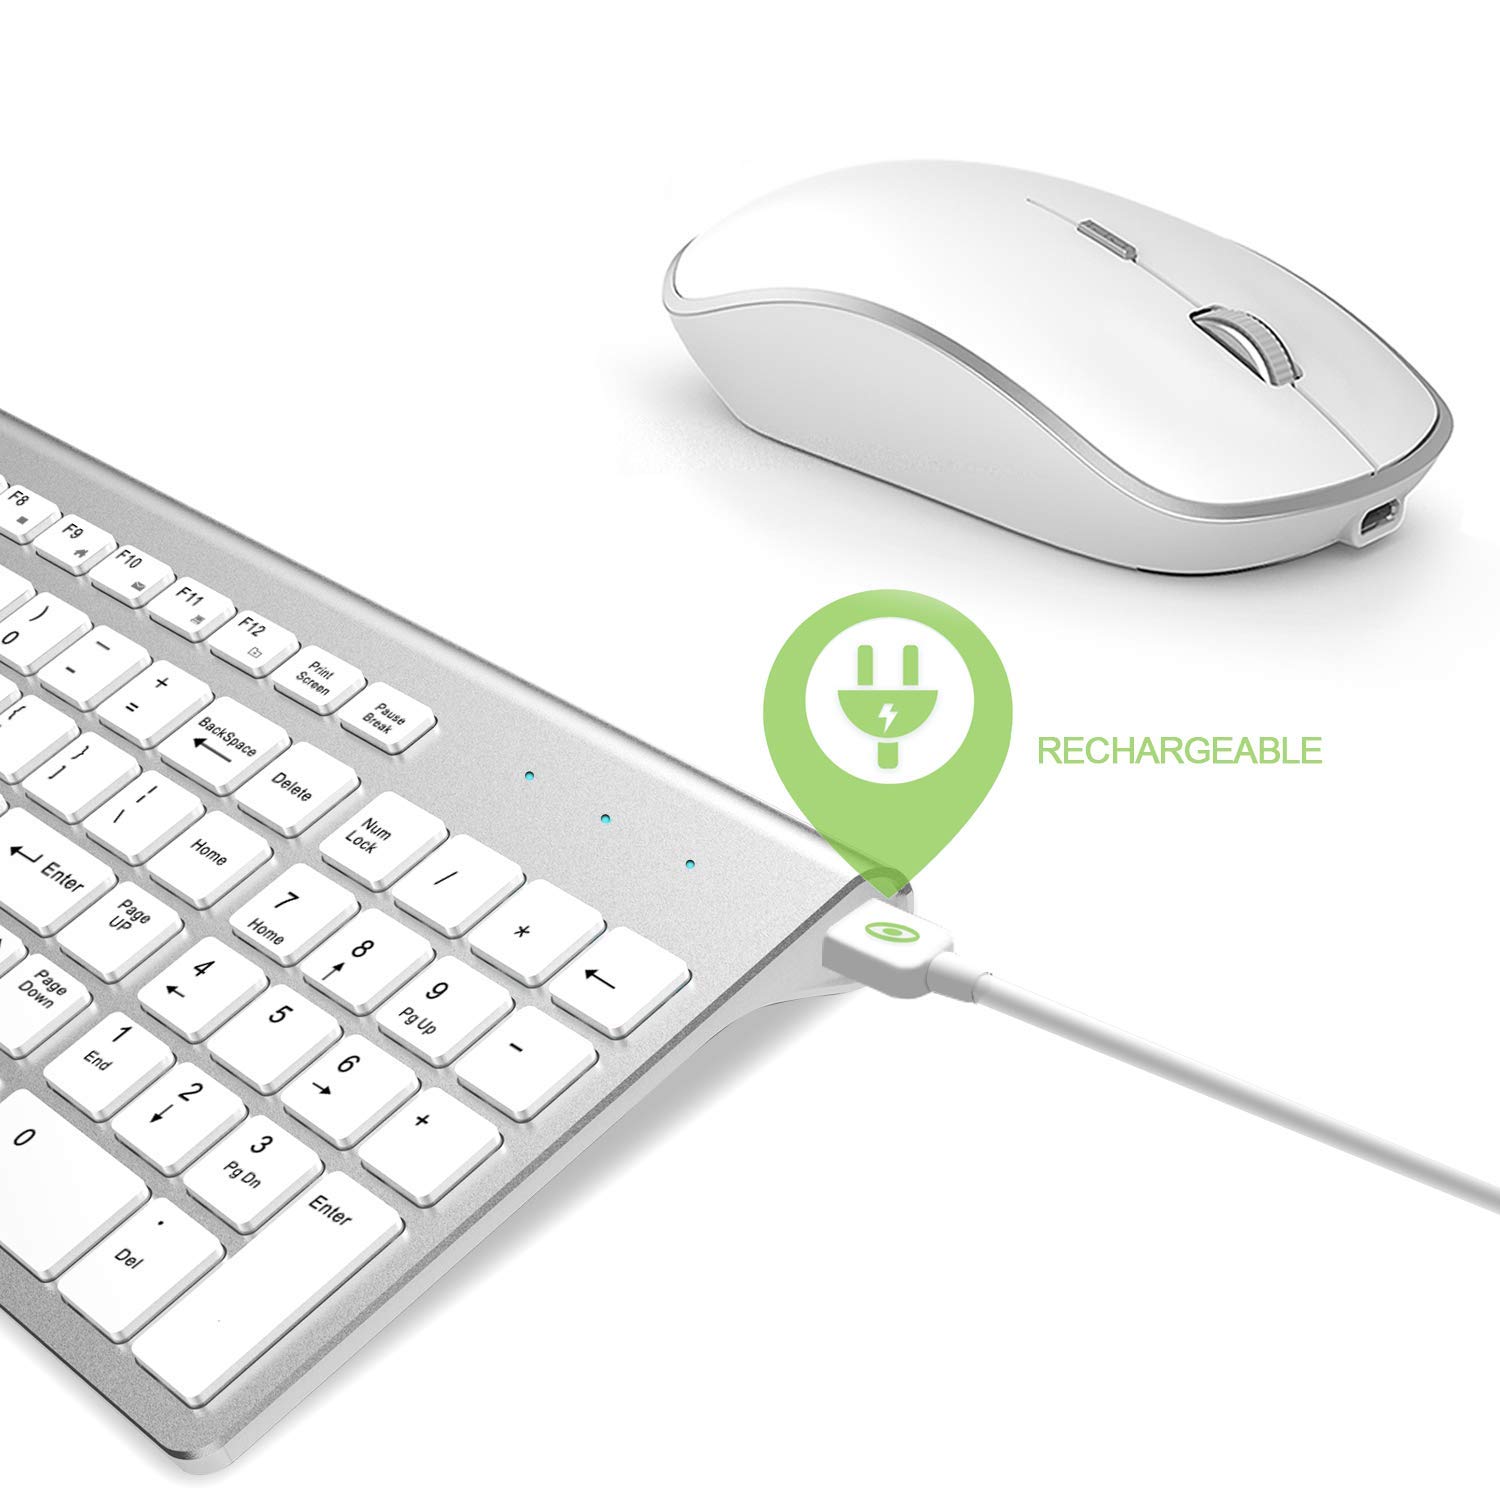 BJL 2.4GHz Wireless Keyboard and Mouse, Ultra Slim Rechargeable